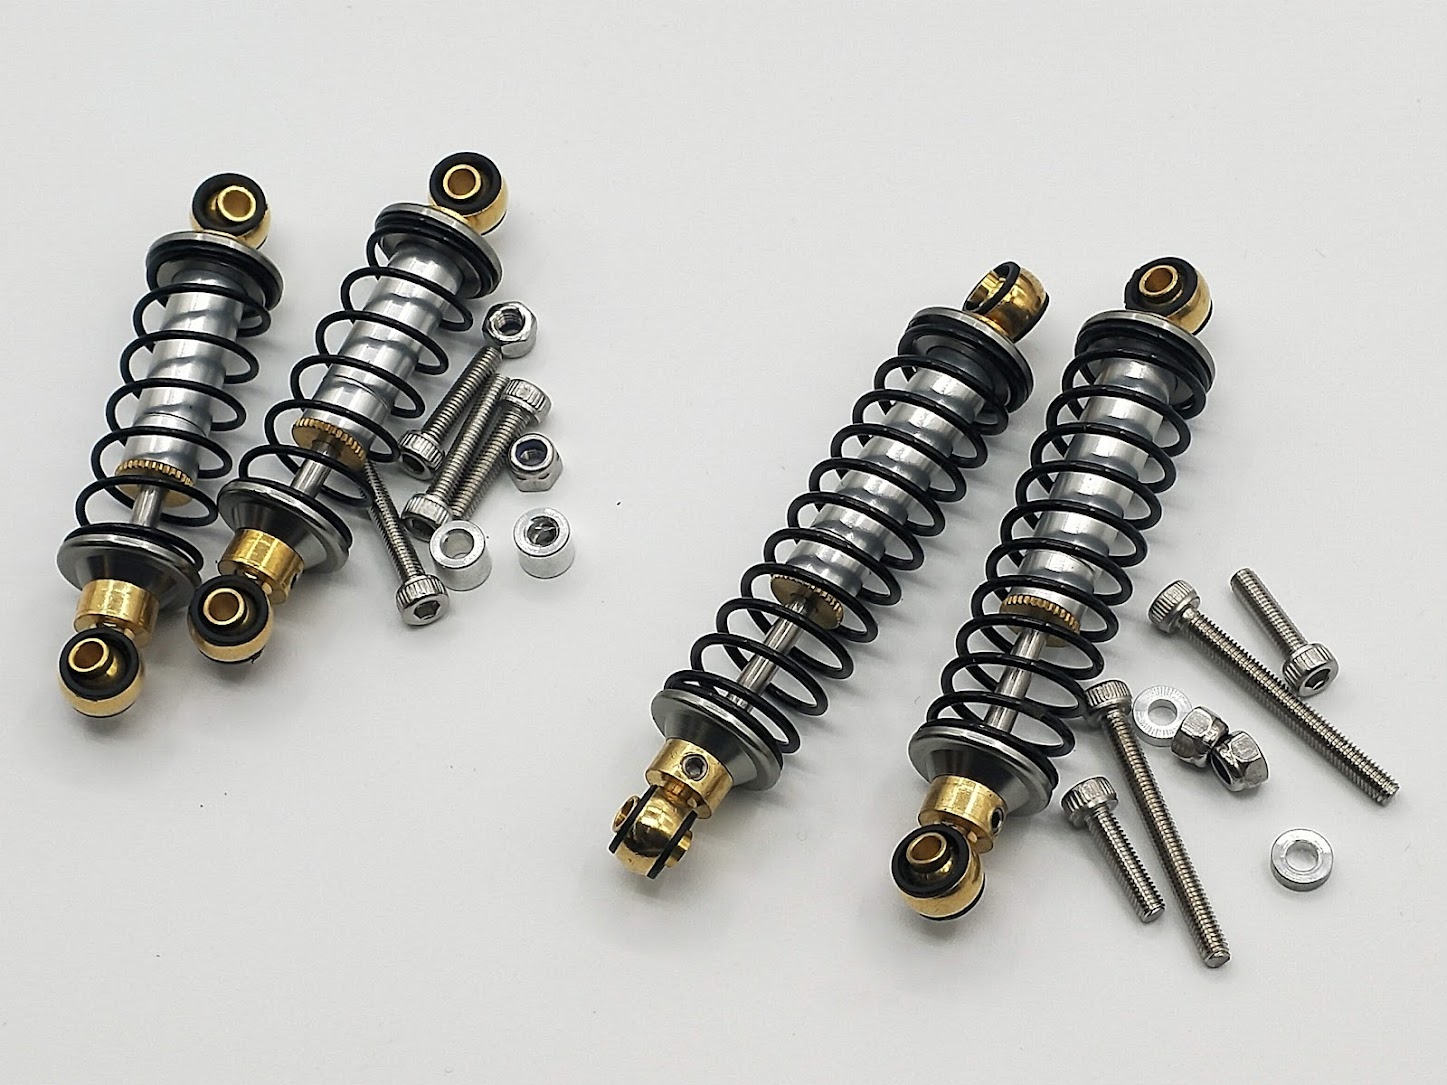 4.RC Wild One Front & Rear shock set